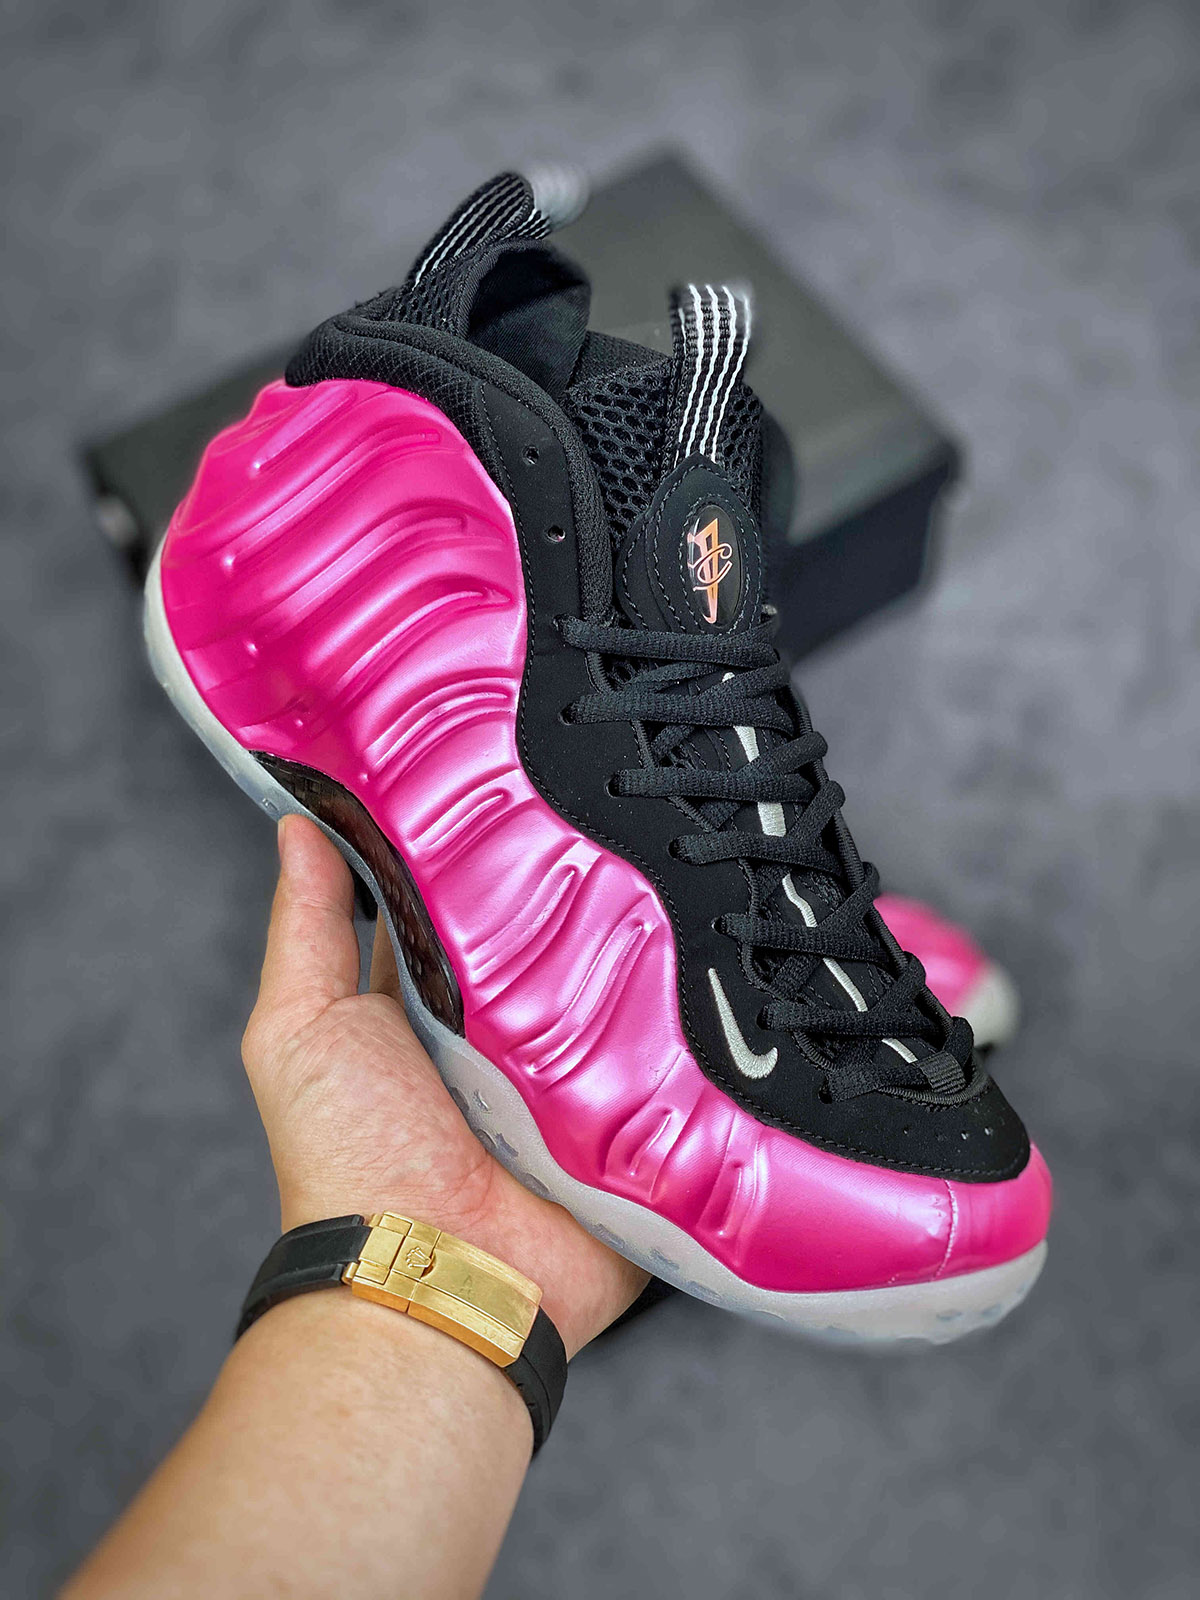 Nike Air Foamposite One Pearlized Pink 314996-660 Shoes